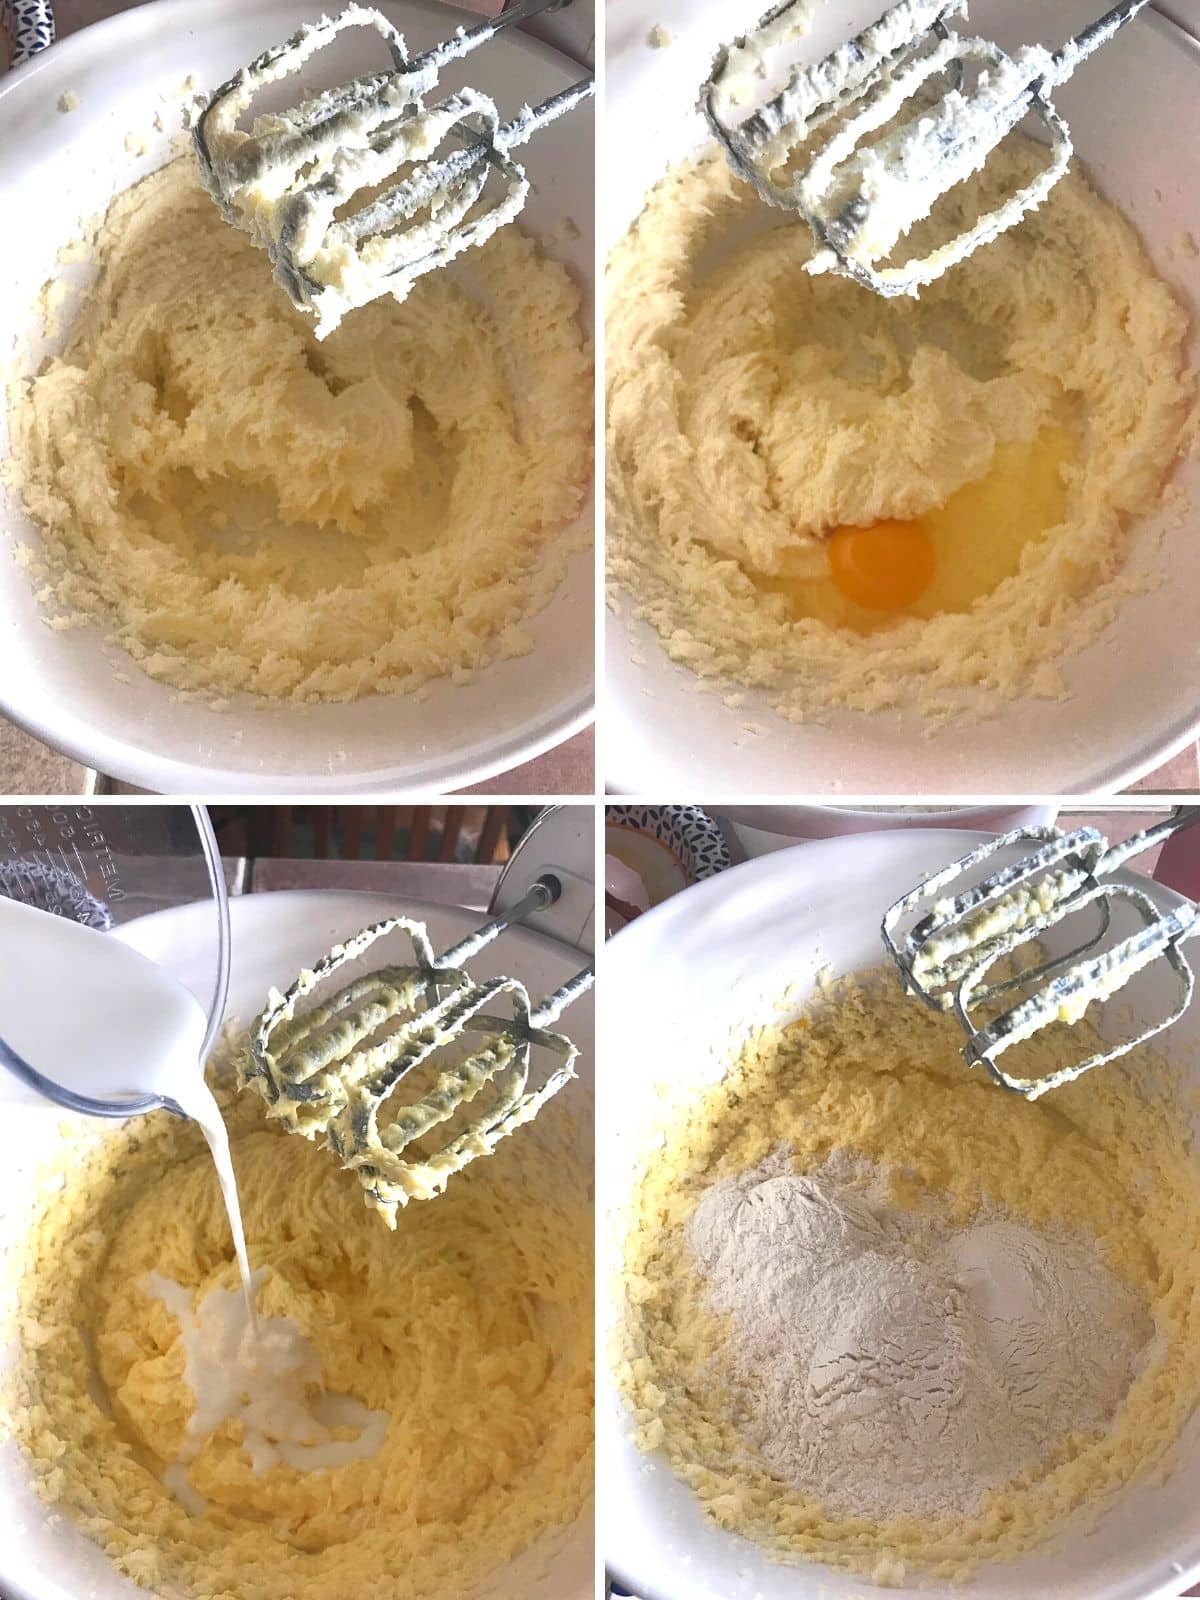 A collage of 4 images showing how to make marble pound cake.